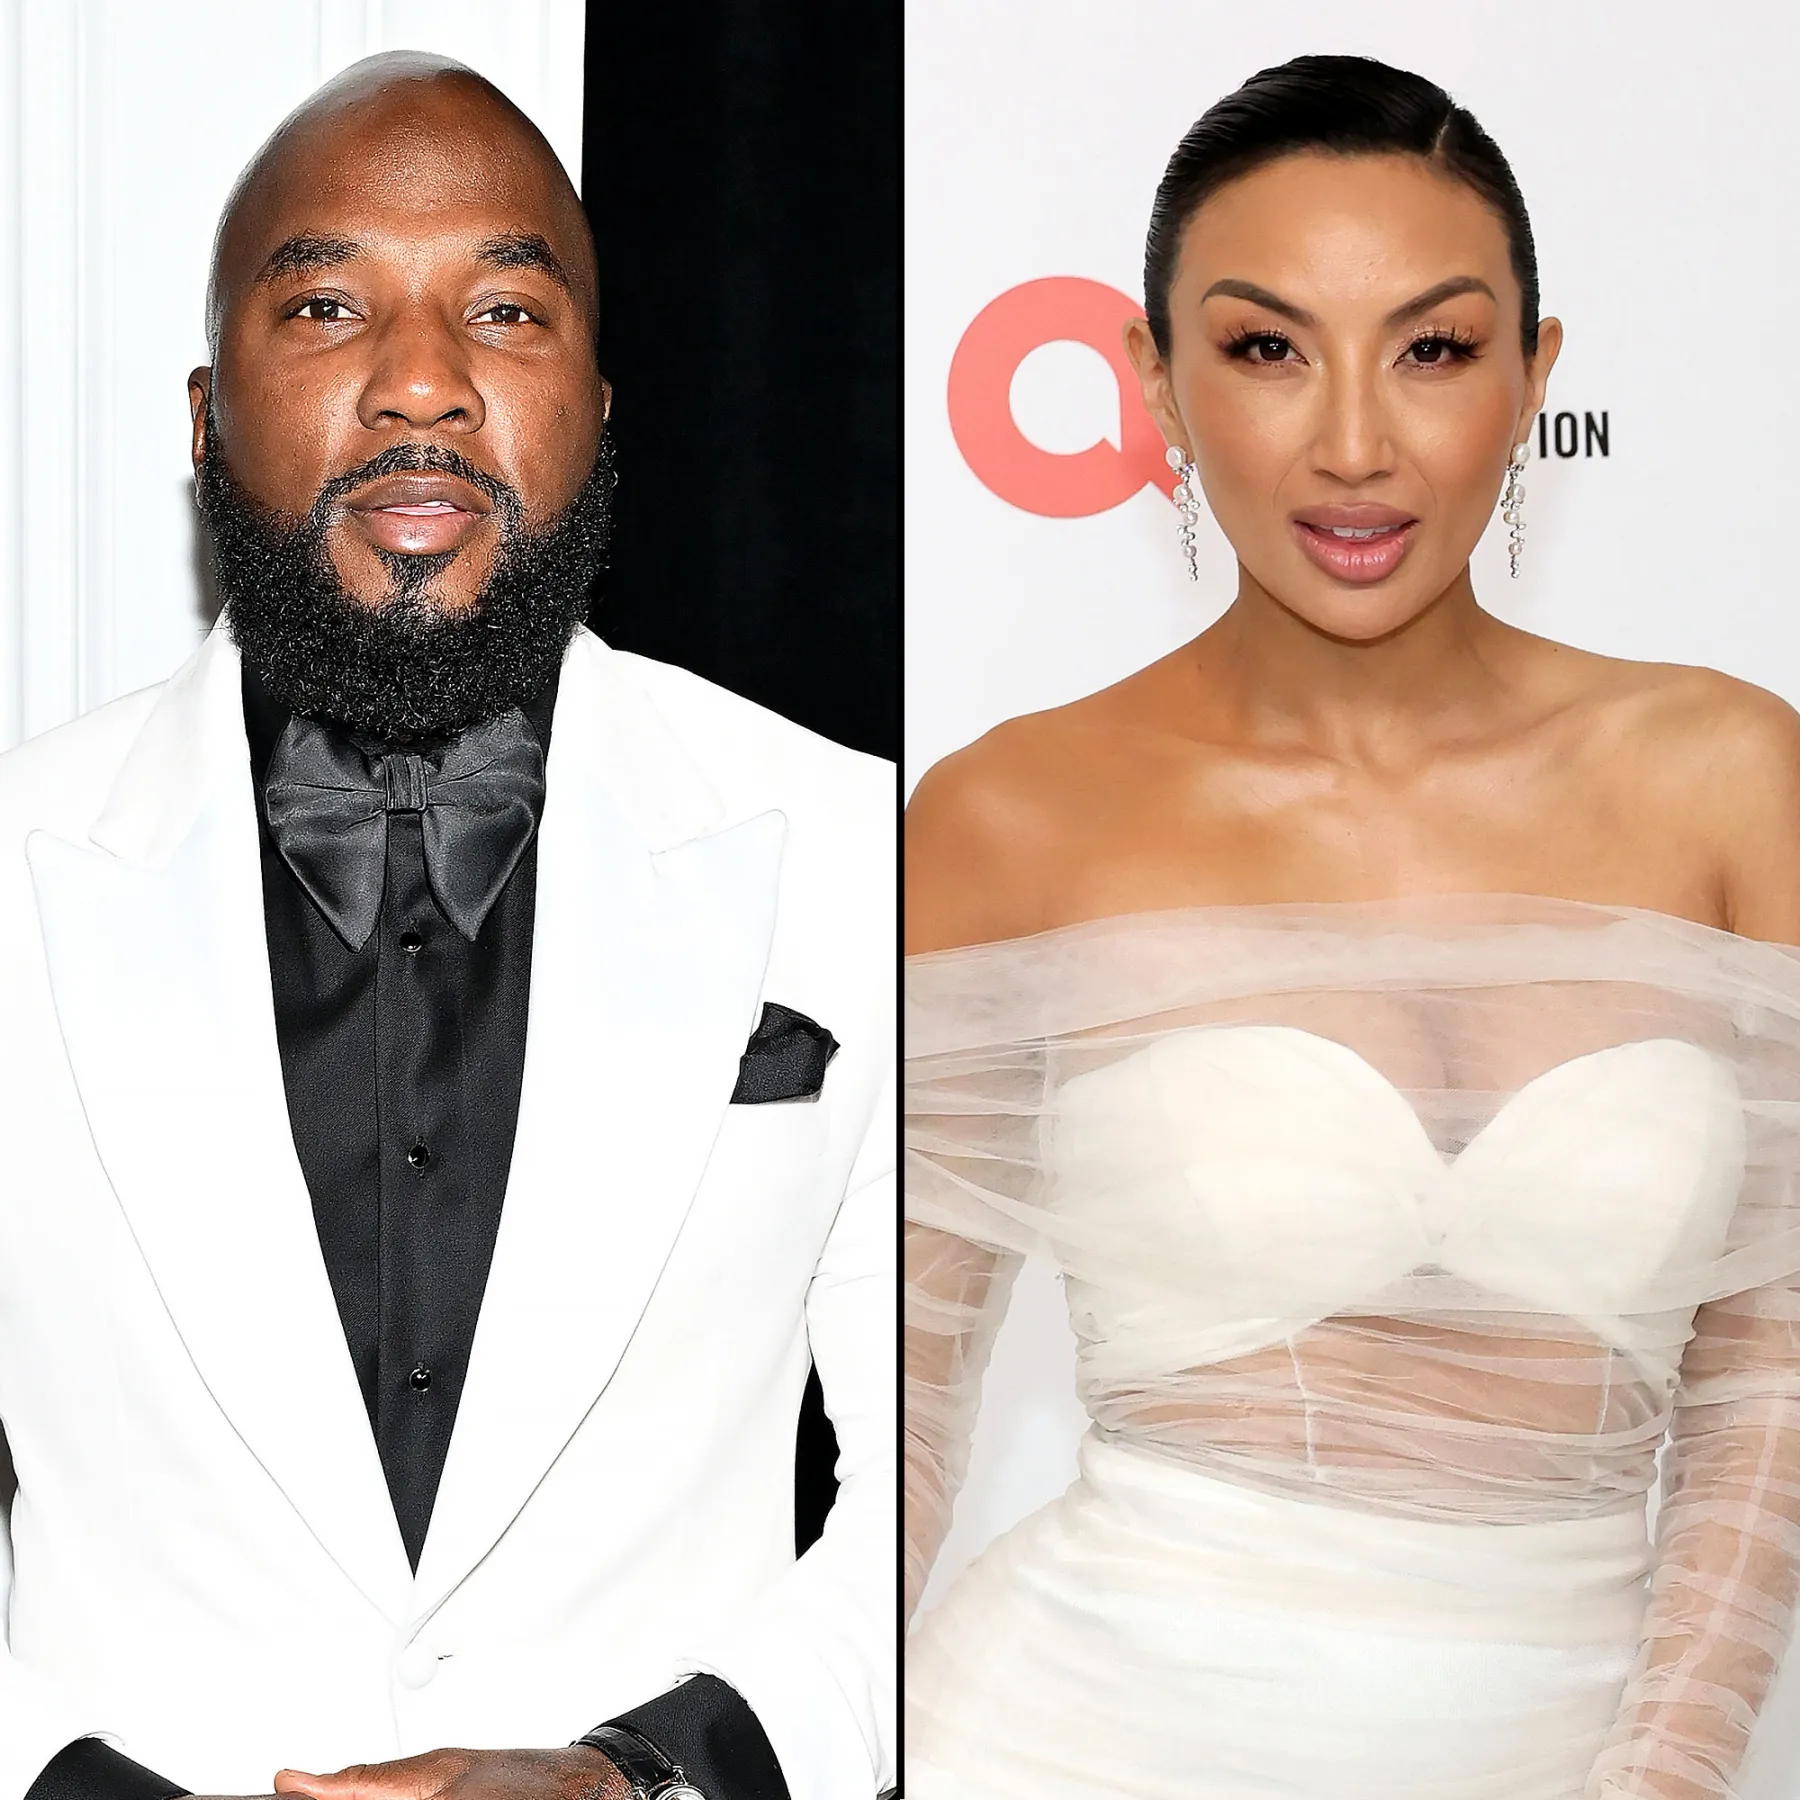 Jeezy Responds to Jeannie Mai's 'Disturbing' Abuse Allegations Amid Ongoing Divorce Drama